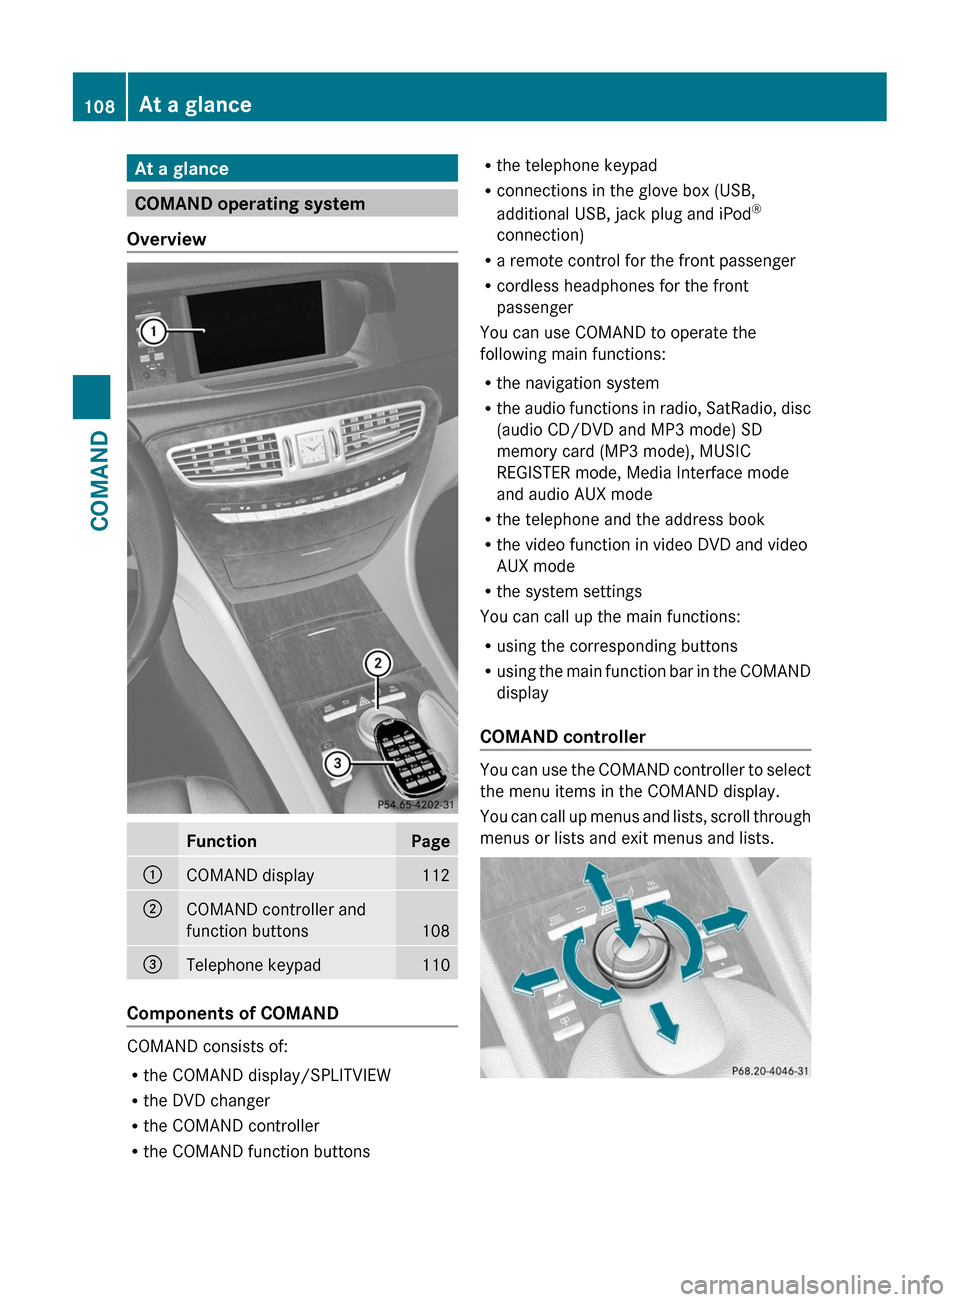 MERCEDES-BENZ CL-Class 2011 C216 Owners Manual At a glance
COMAND operating system
Overview
FunctionPage:COMAND display112;COMAND controller and
function buttons108
=Telephone keypad110
Components of COMAND
COMAND consists of:
Rthe COMAND display/